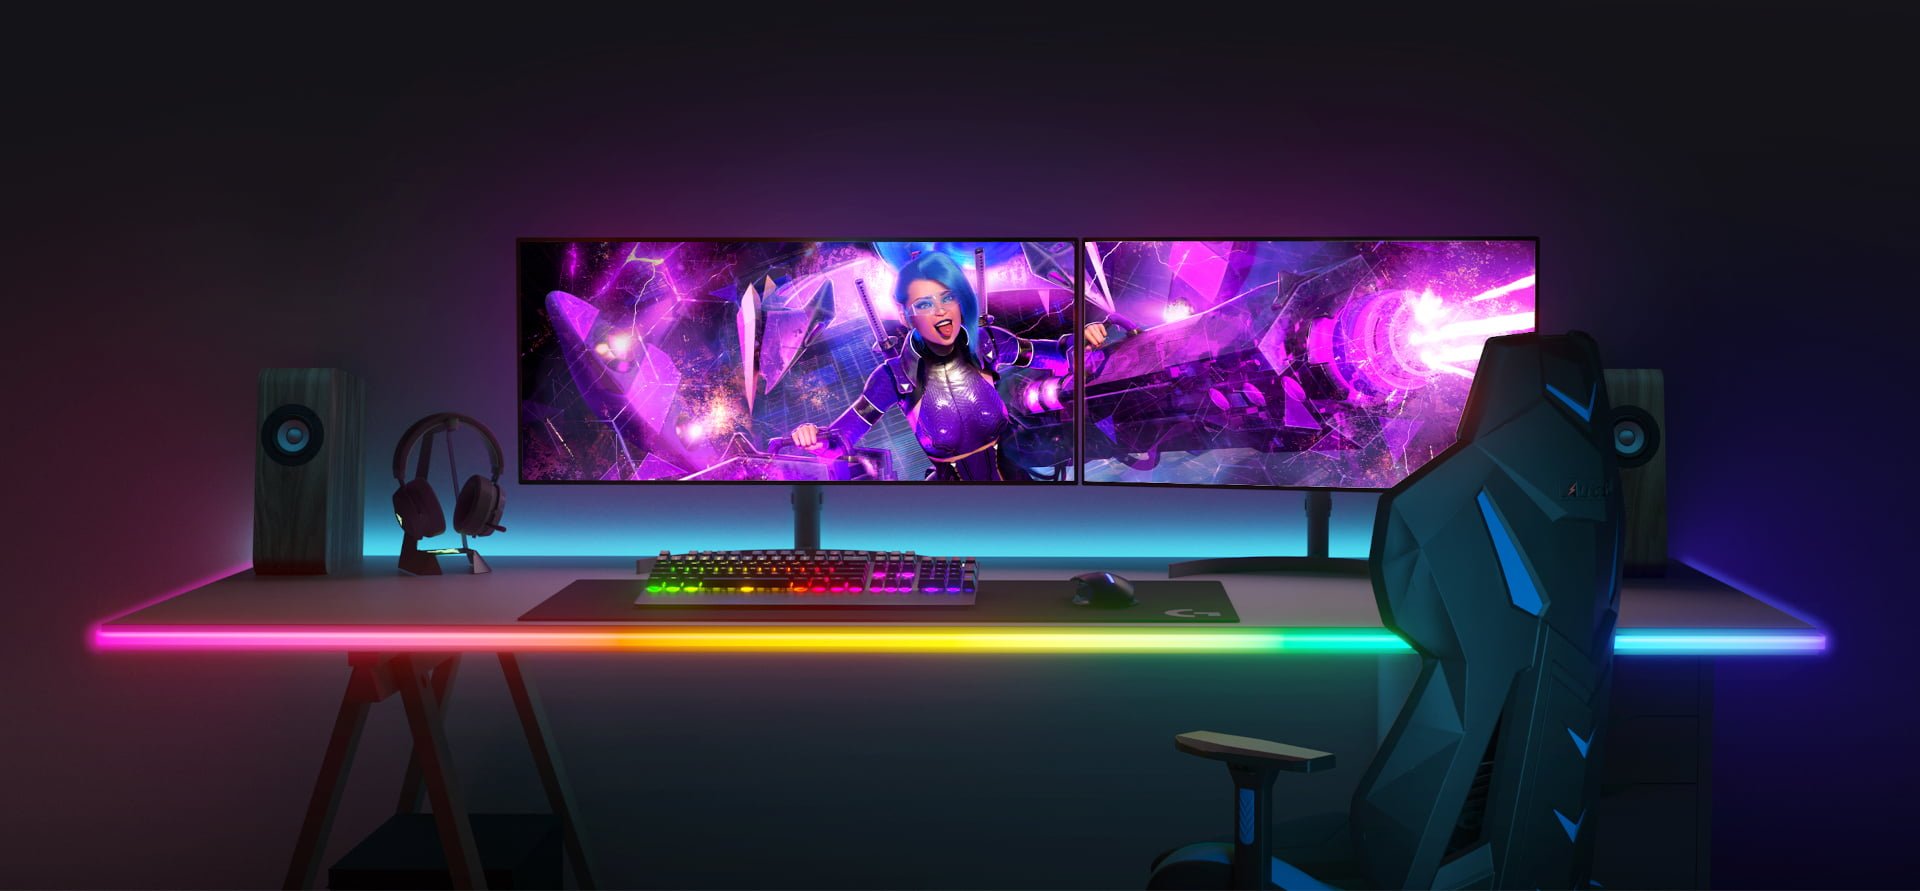 https://www.techreviewer.de/wp-content/uploads/2023/04/govee-rgbic-gaming-neon-led-strip-lifestyle_2.jpg